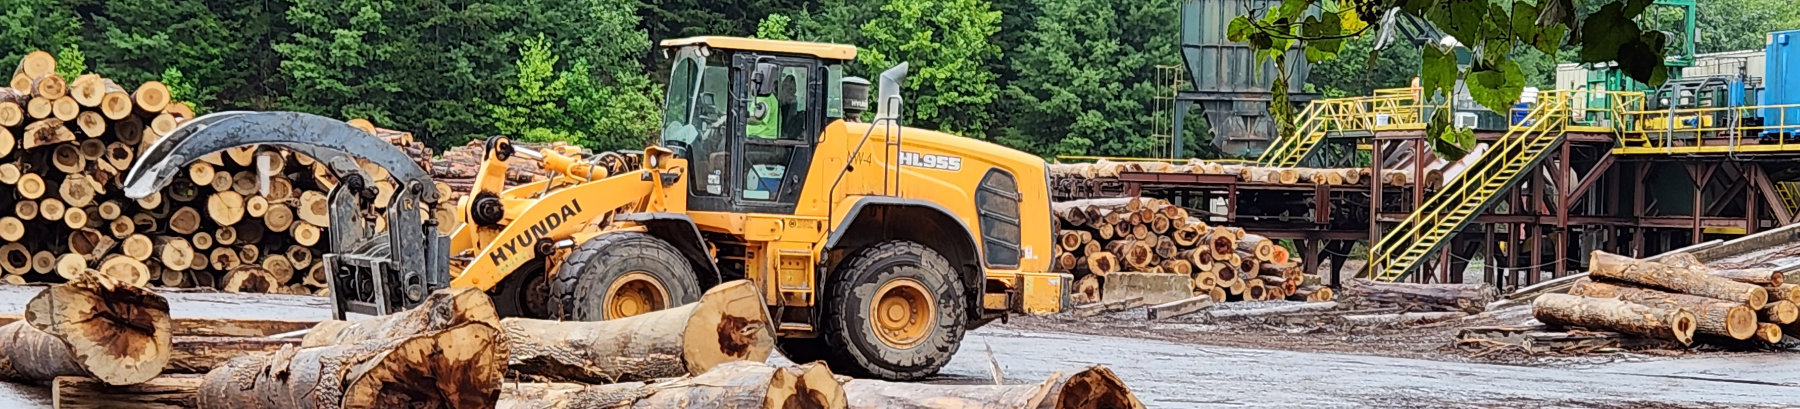 A yellow wheel loader working at a log yard with piles of logs.